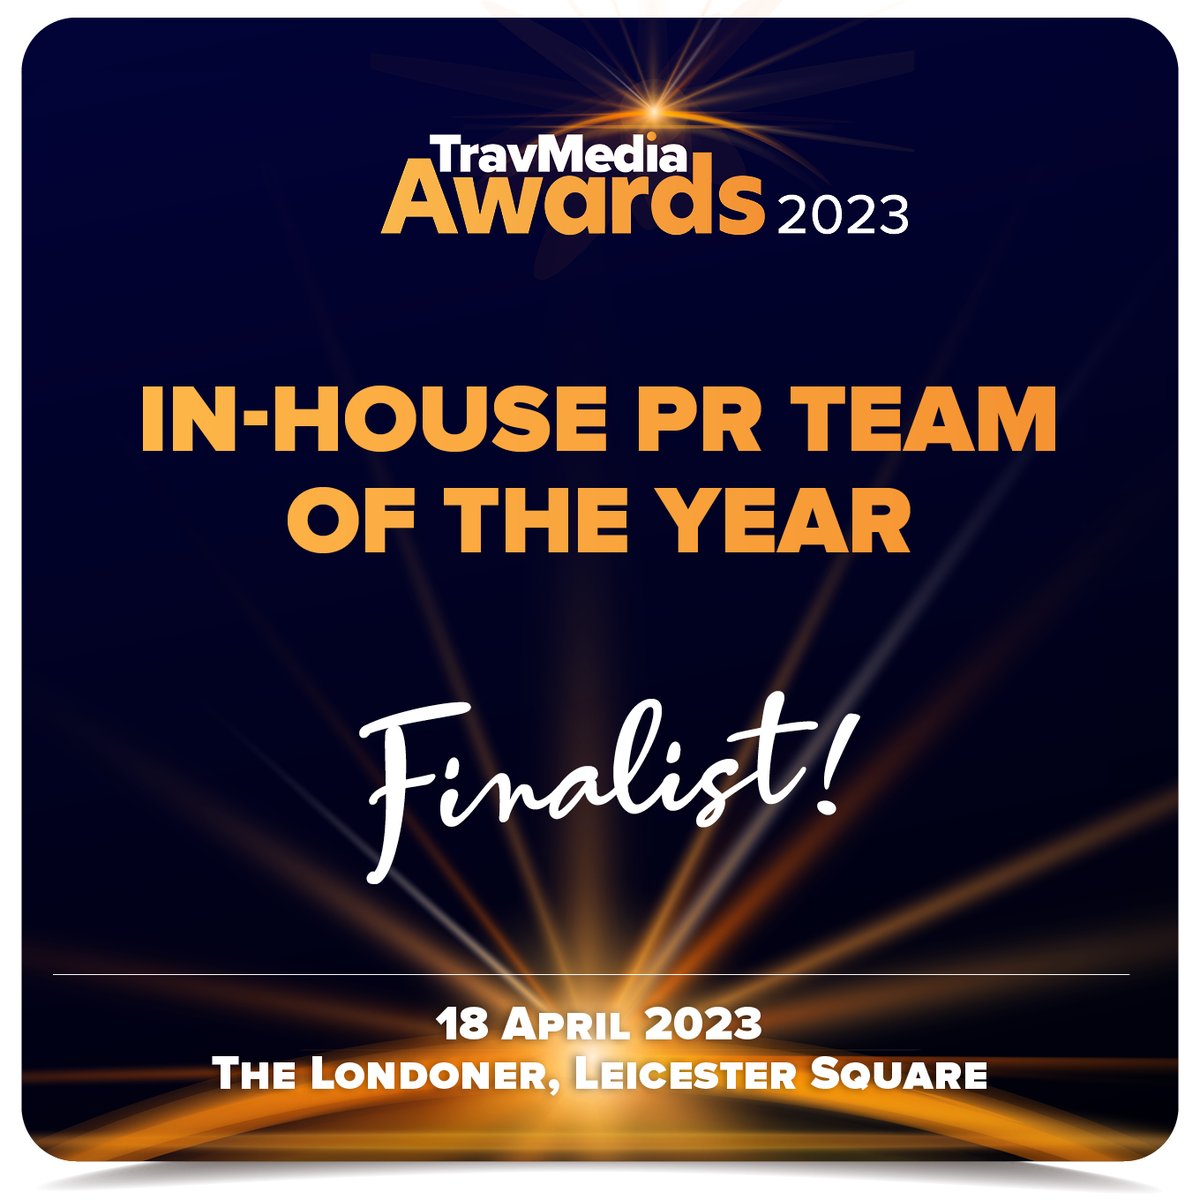 #TravMediaAwards thank you so much @TravMedia_UK ! Good luck to all of those shortlisted